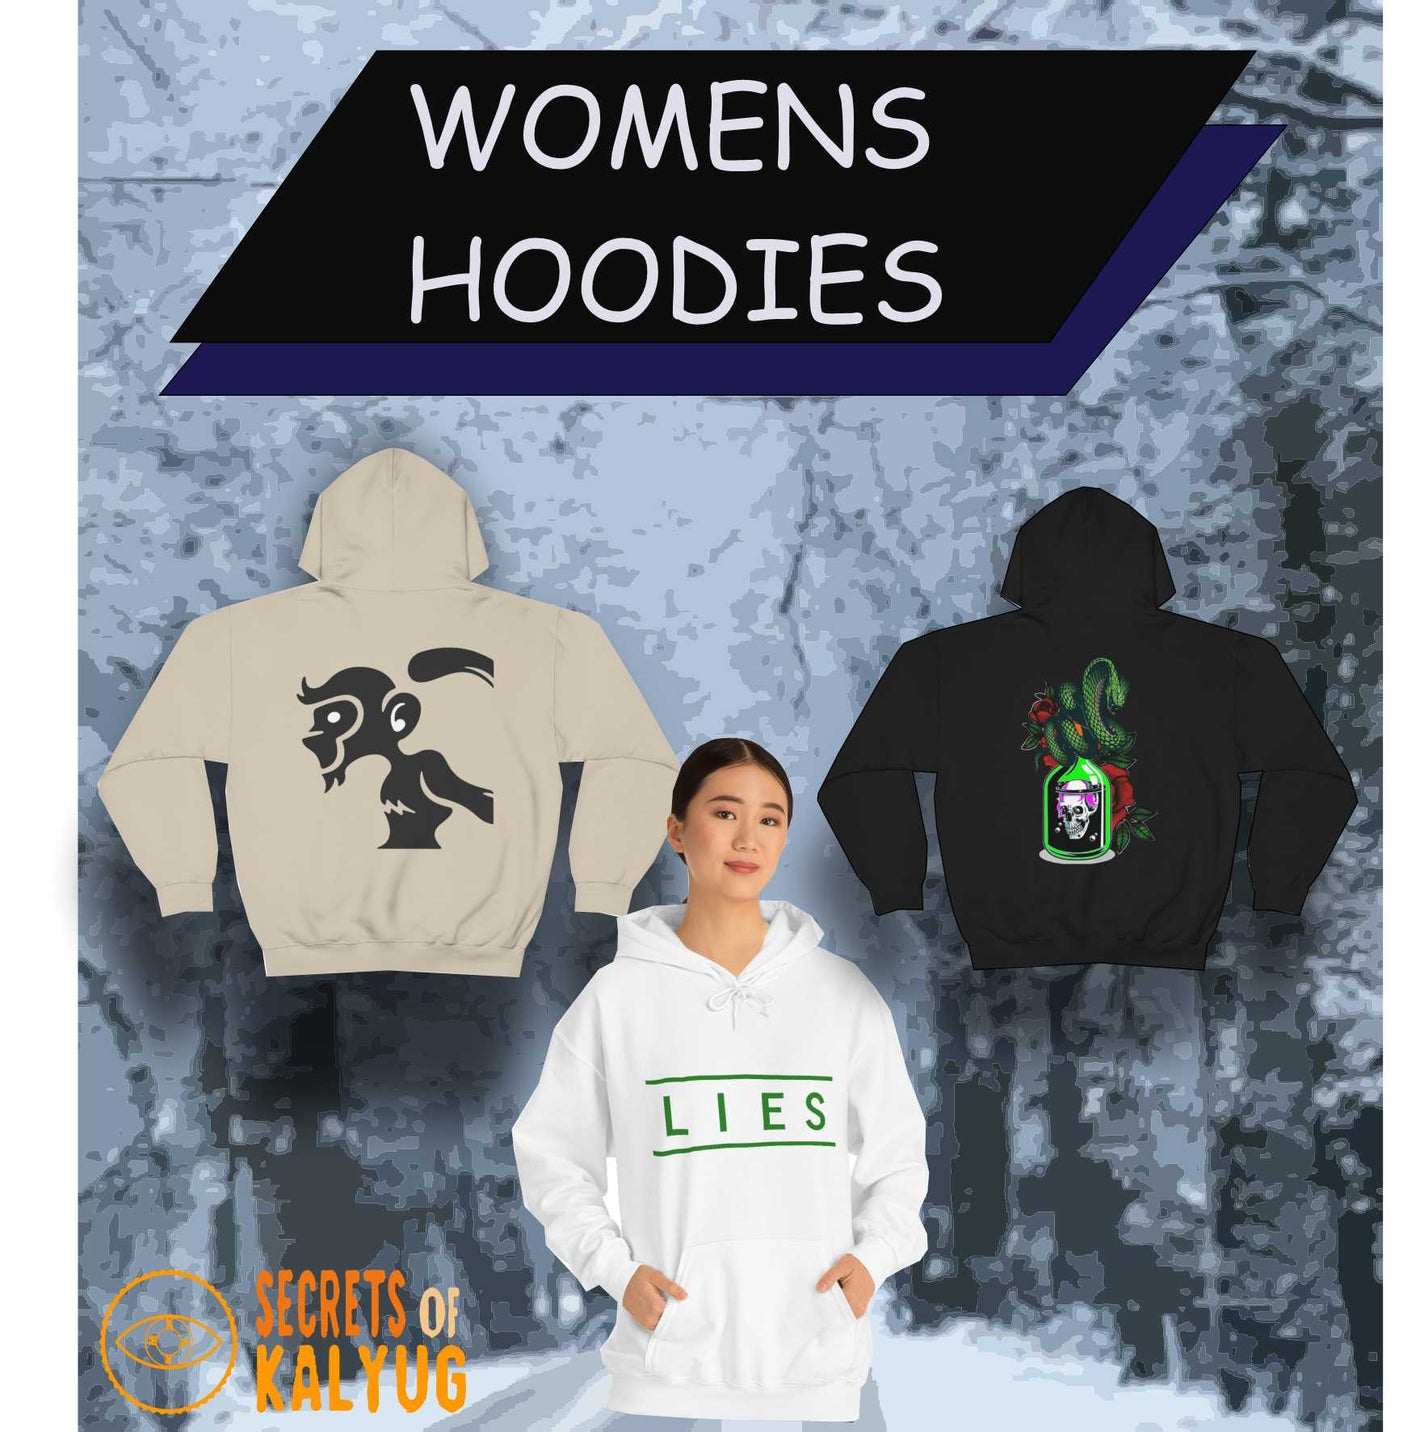 women's hoodies collection by secrets of kalyug